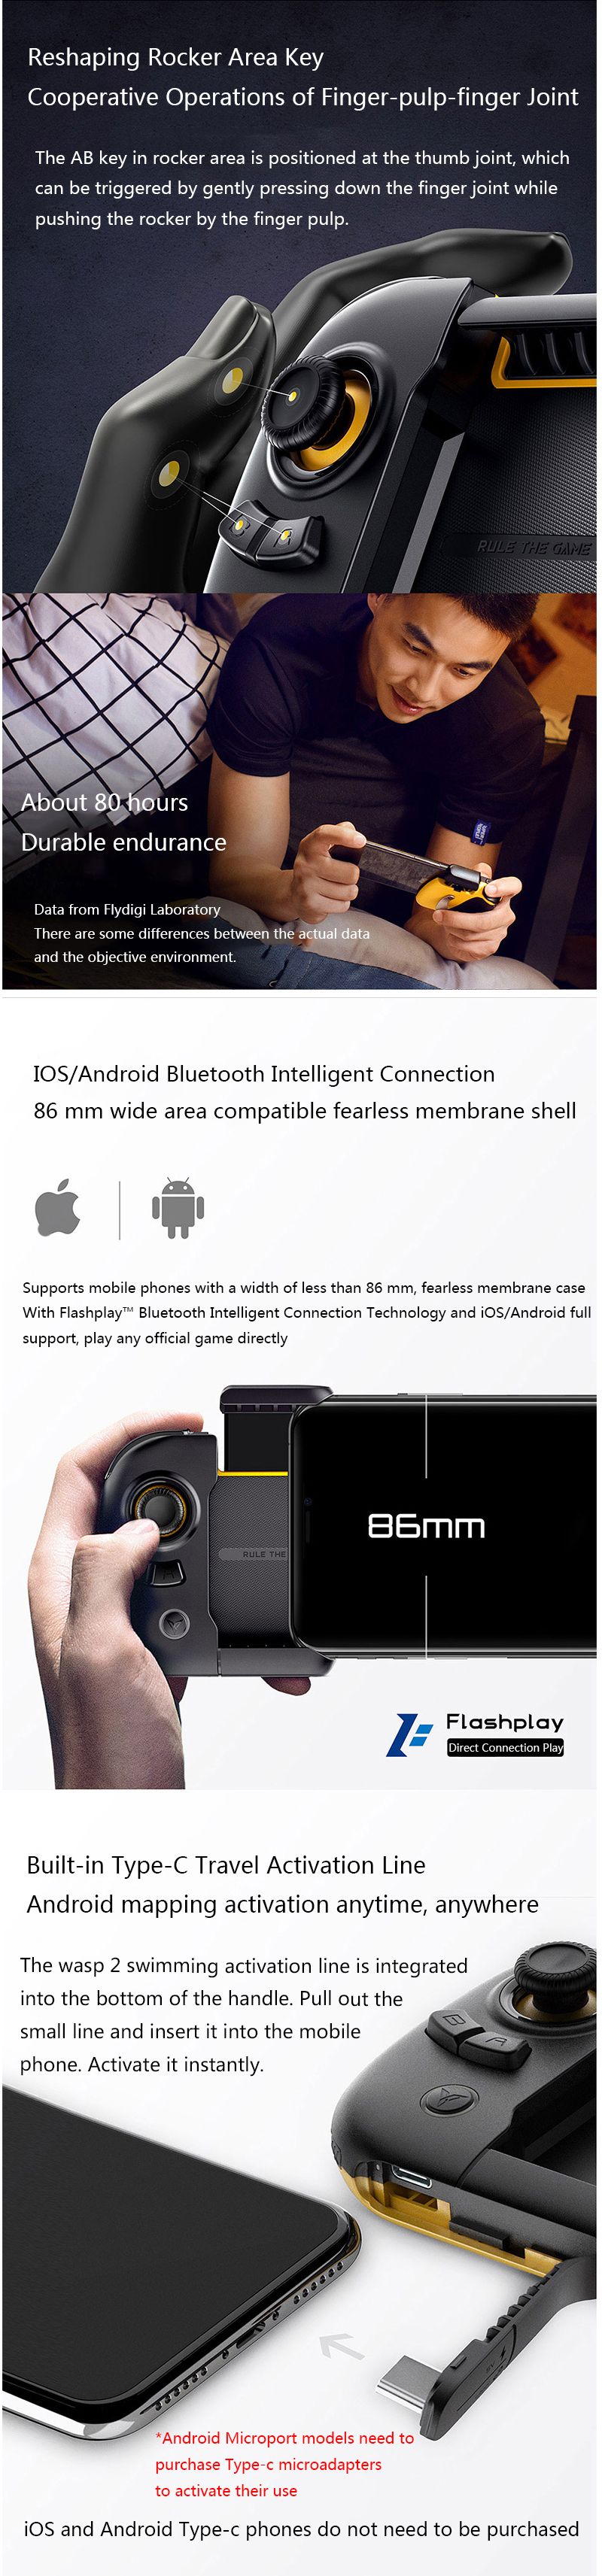 Flydigi-Wasp2-bluetooth-Gamepad-for-PUBG-Mobile-Games-Automatic-Pressure-Game-Controller-for-iOS-And-1522846